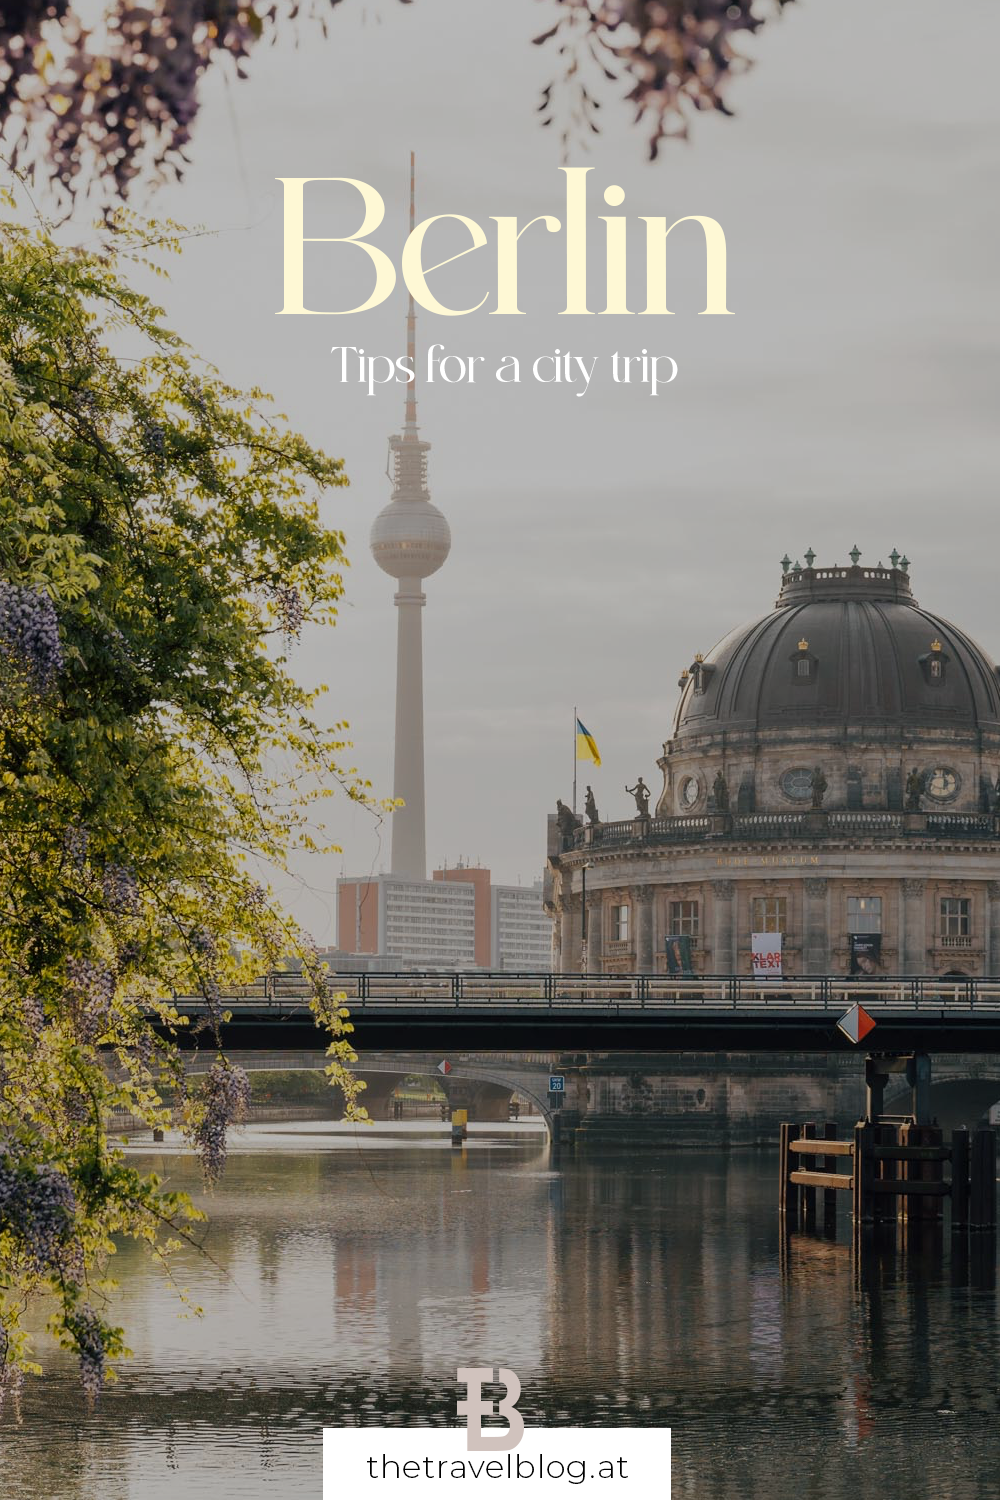 Berlin travel blog with tips for a city trip